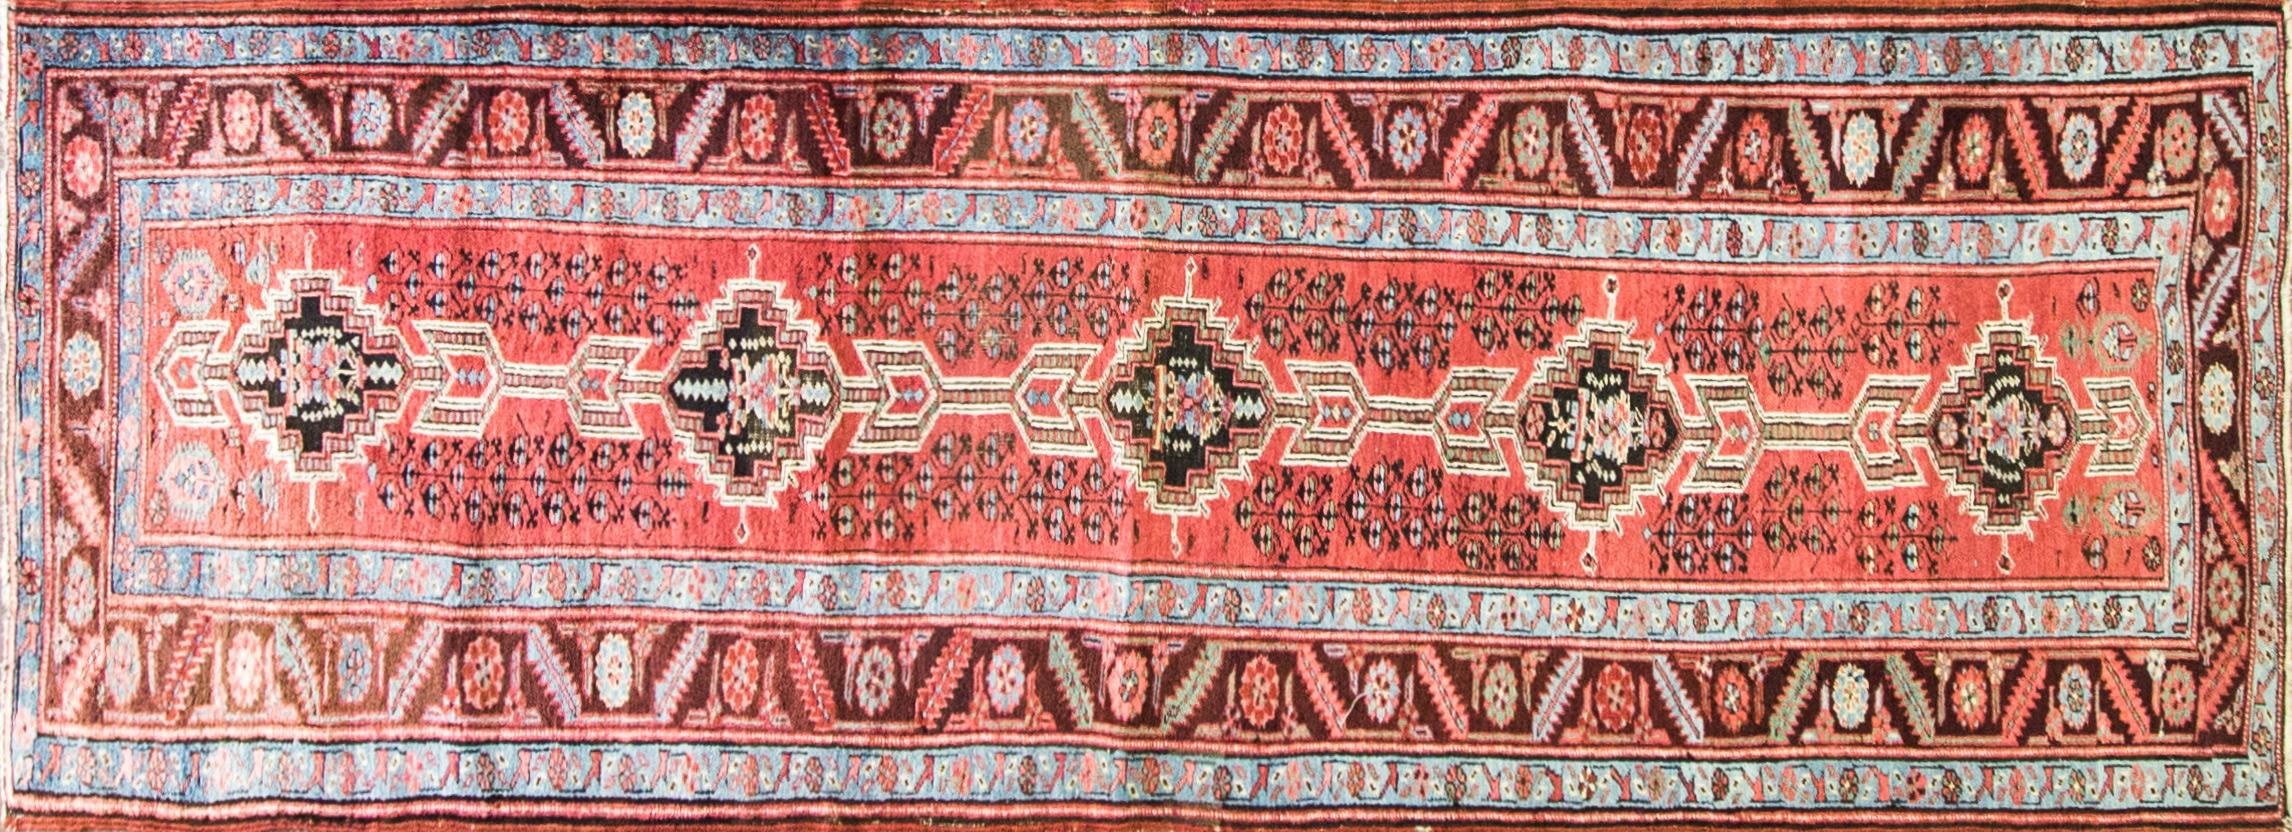 North West Persian rugs are straddling the Caucasus mountains, Caspian sea and borders with South Asia. Rugs produced in North West Persia represent a convergence of cultures from the Kazakhs and Khazars to the invading Mughals. The region of N.